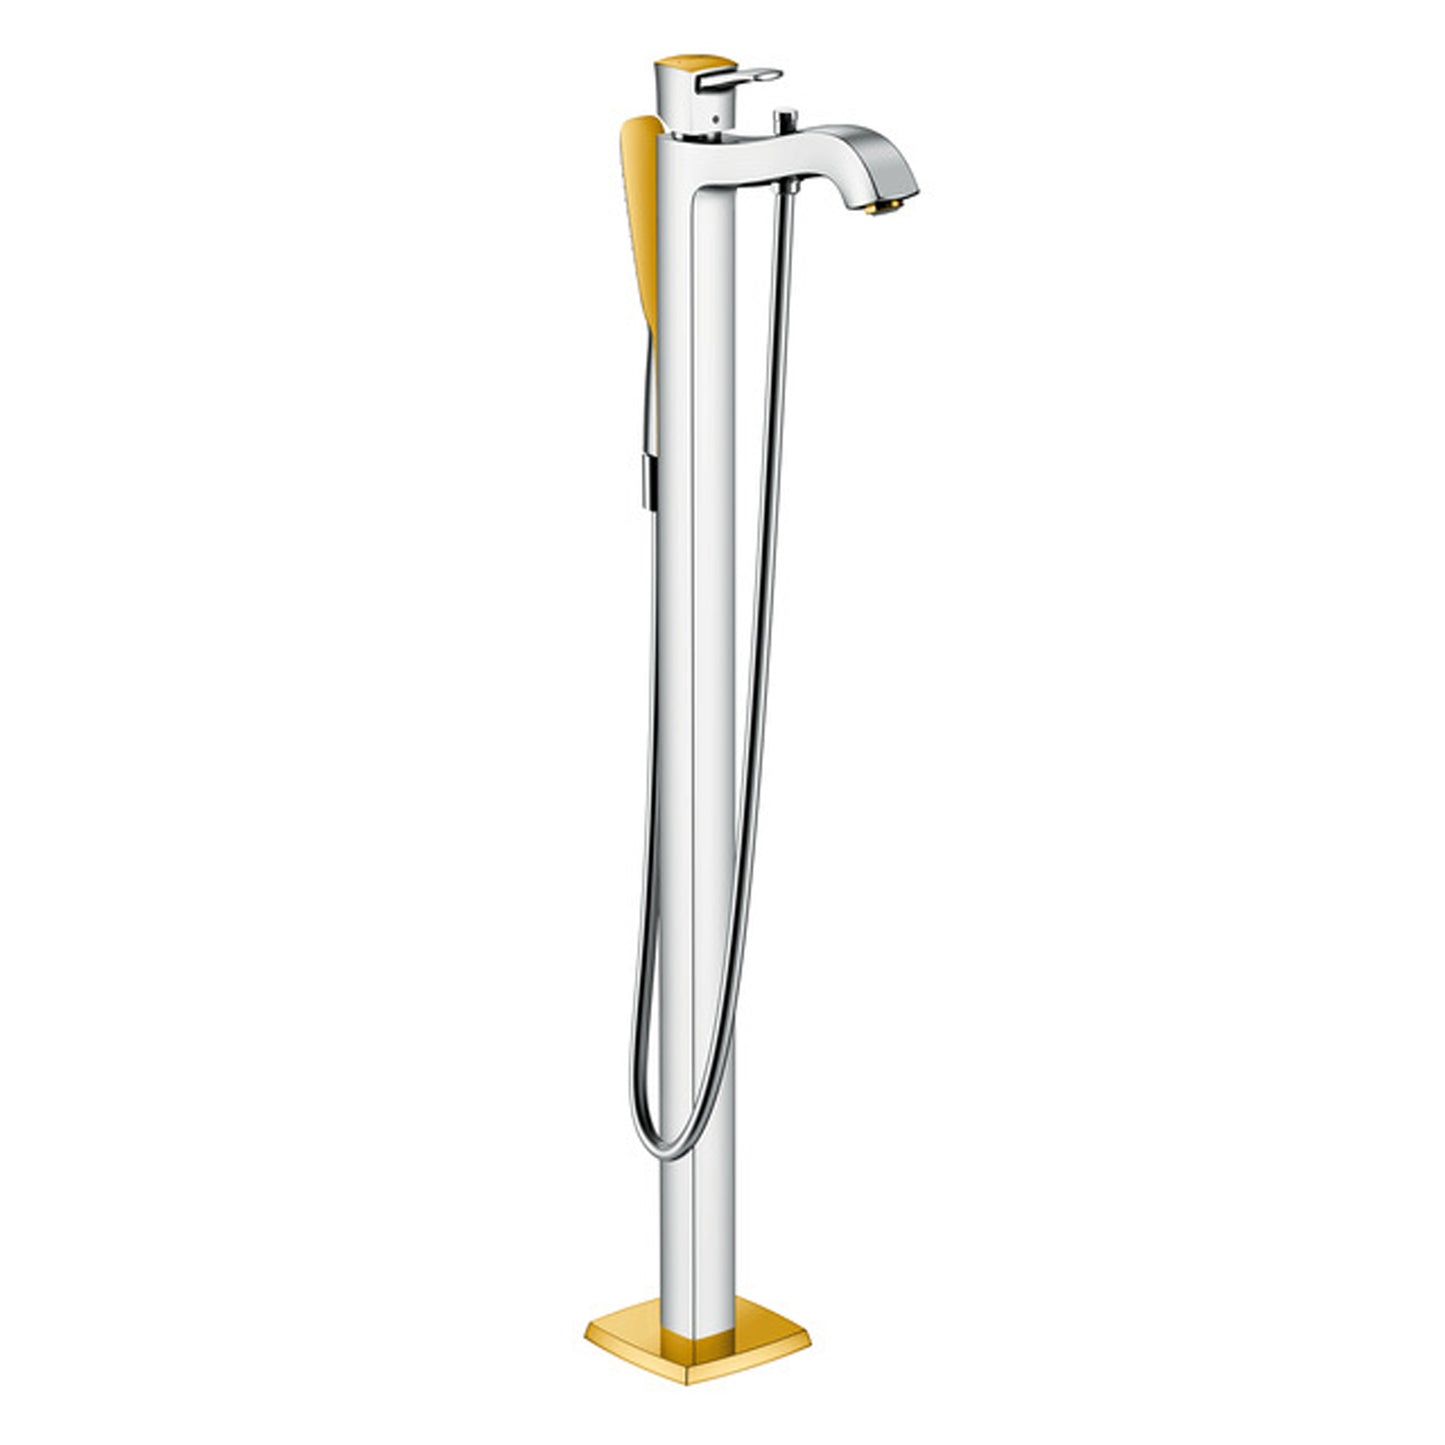 Hansgrohe Metropol Classic Floor mounted tub mixer with handshower with 10452.180 basic set 31445.090